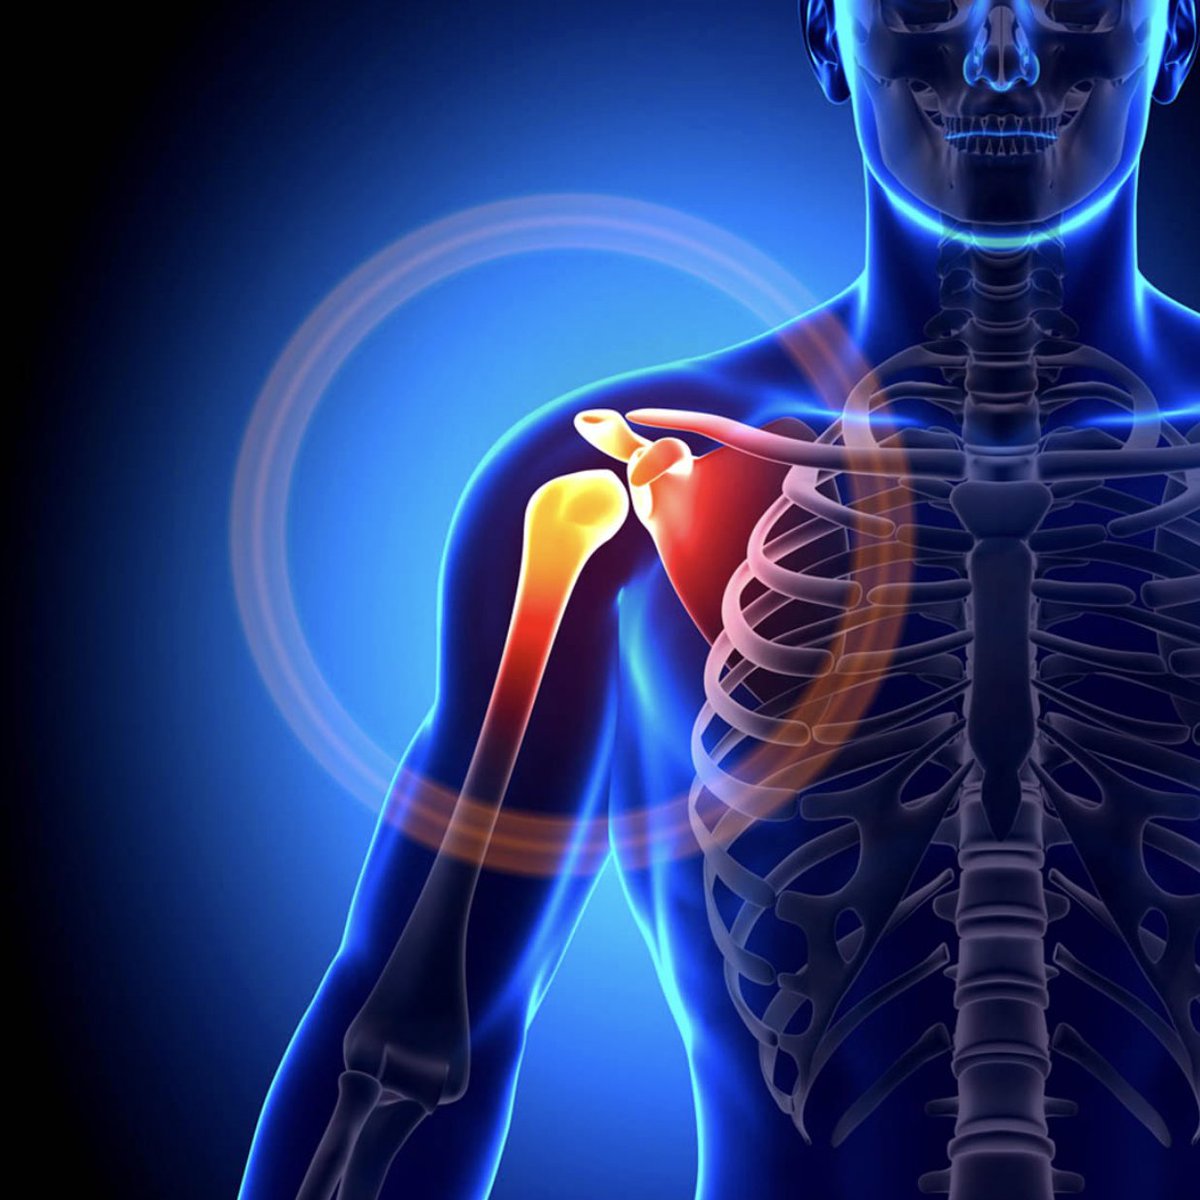 The most common cause of shoulder pain: Shoulder impingement. It accounts for 44% to 65% of all shoulder complaints. Here are 5 exercises to reduce pain (and increase strength):